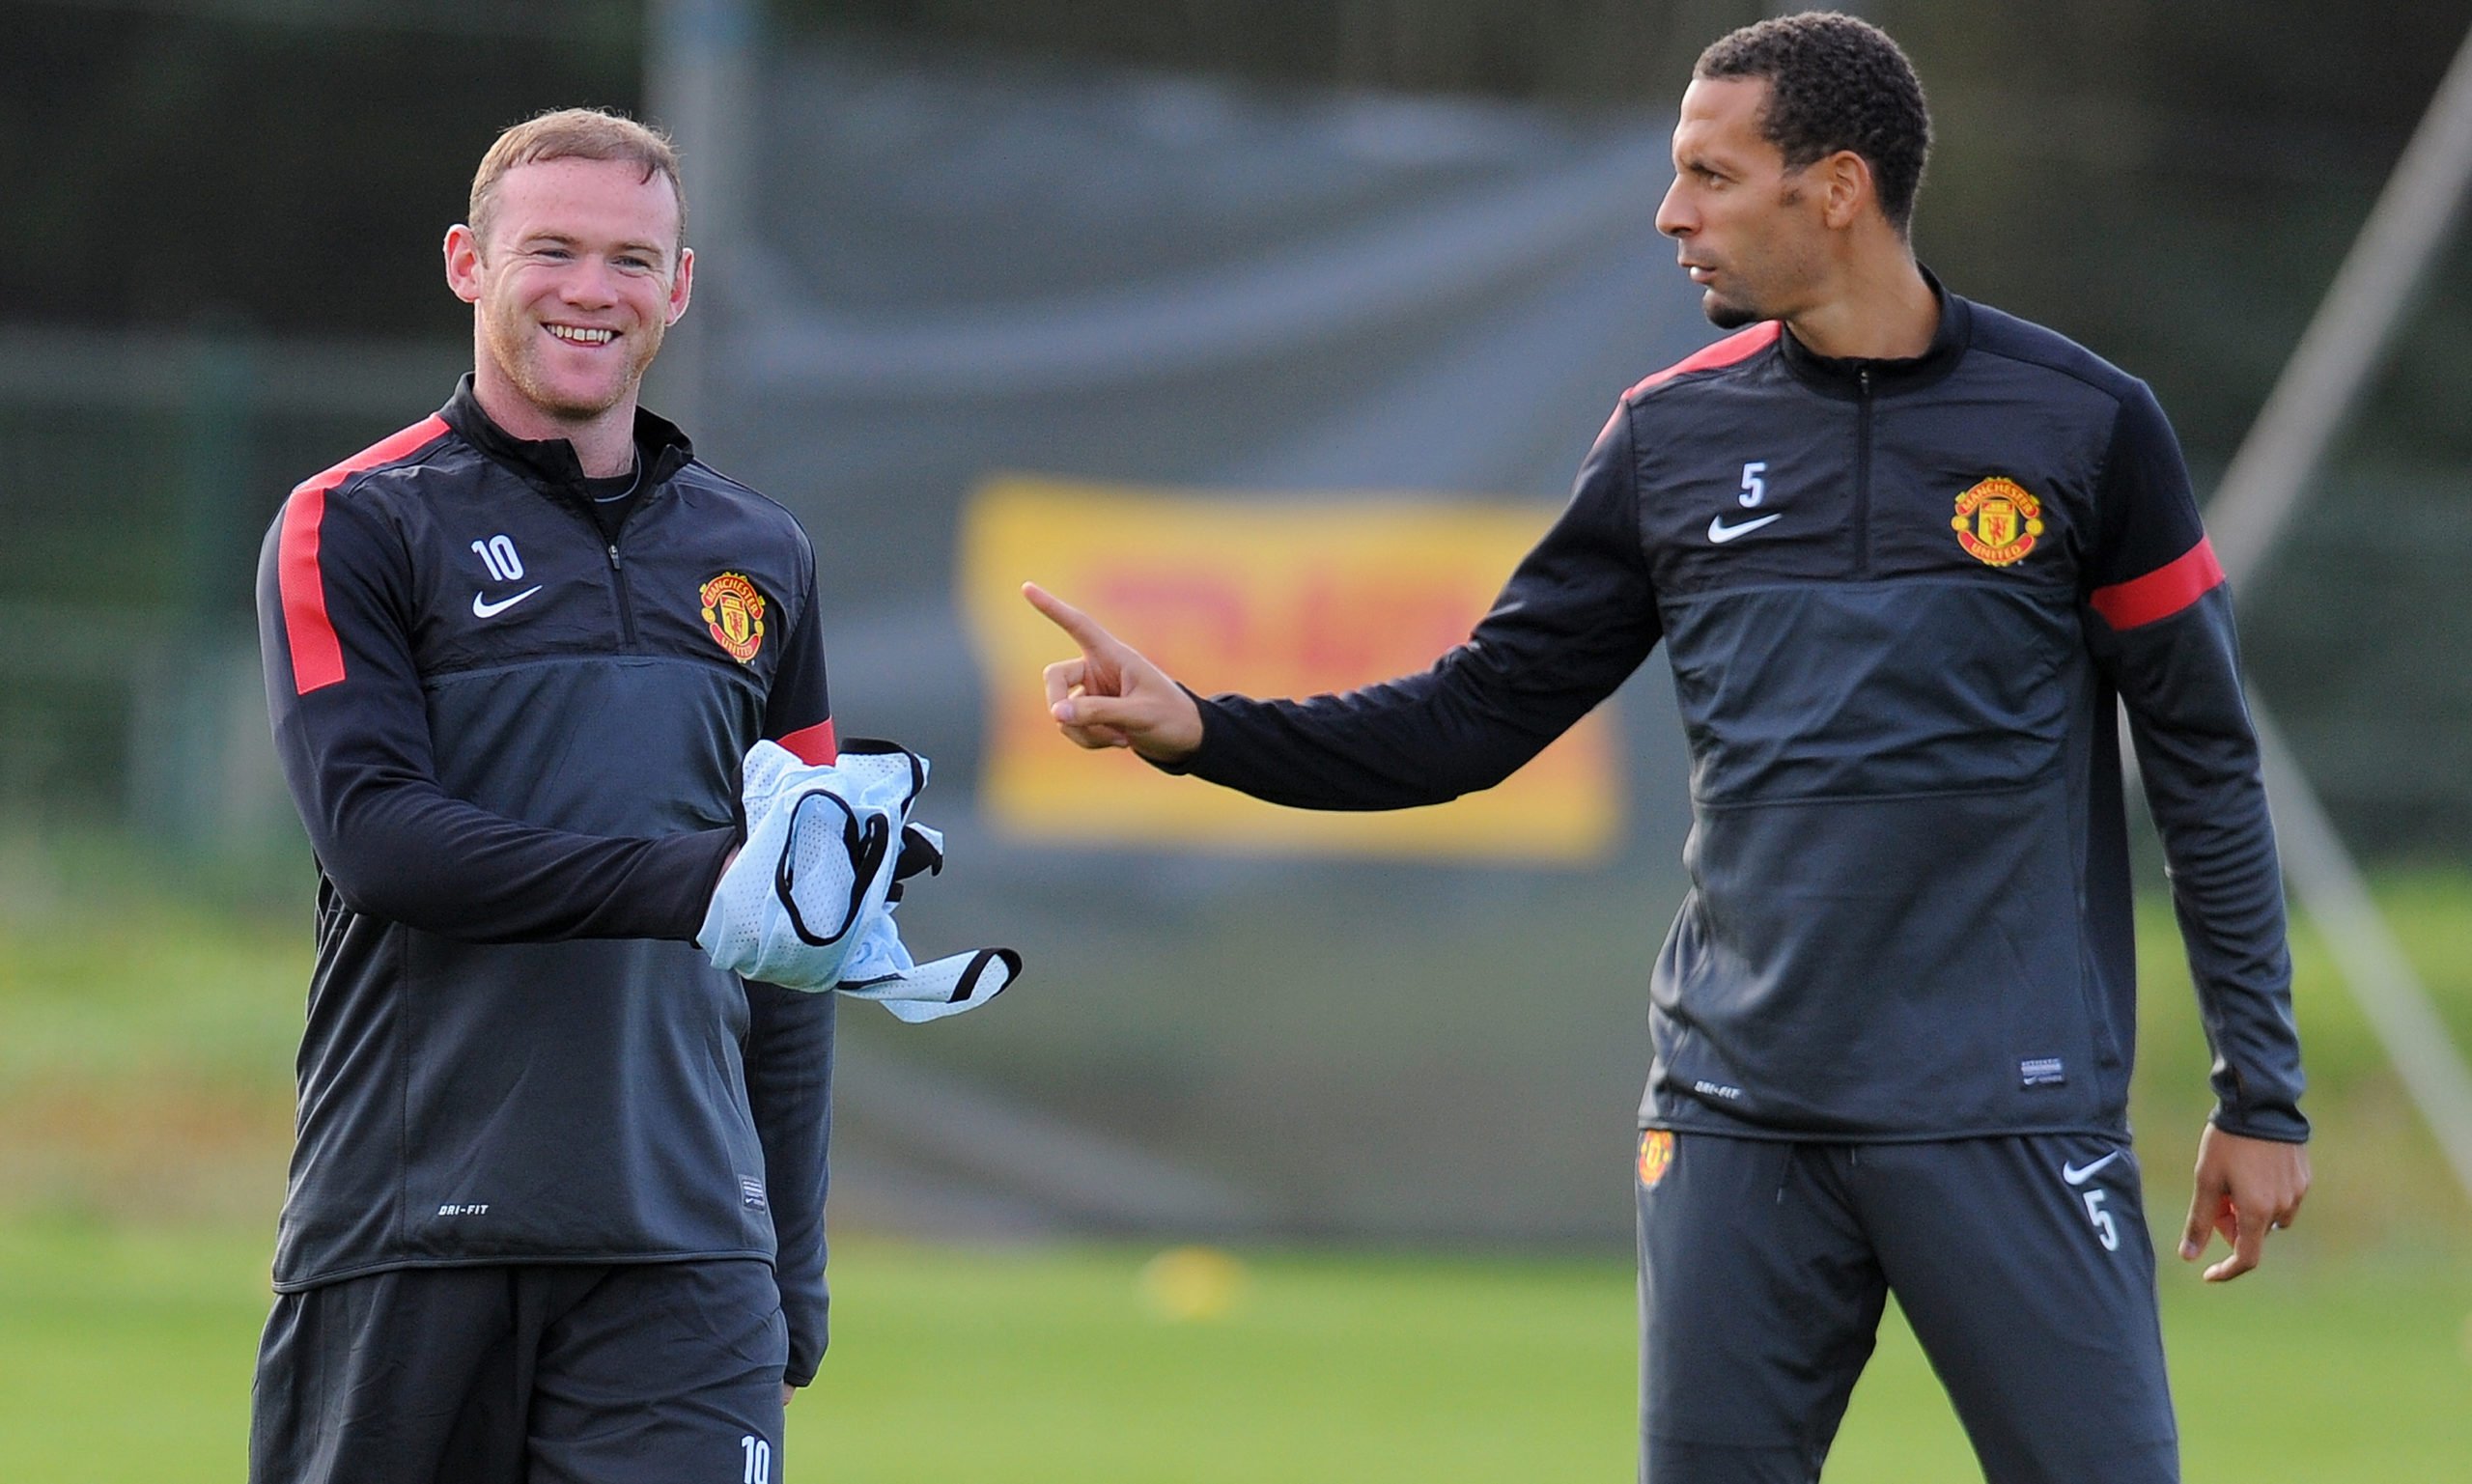 Rio Ferdinand says he used to argue with Wayne Rooney 'every training session'